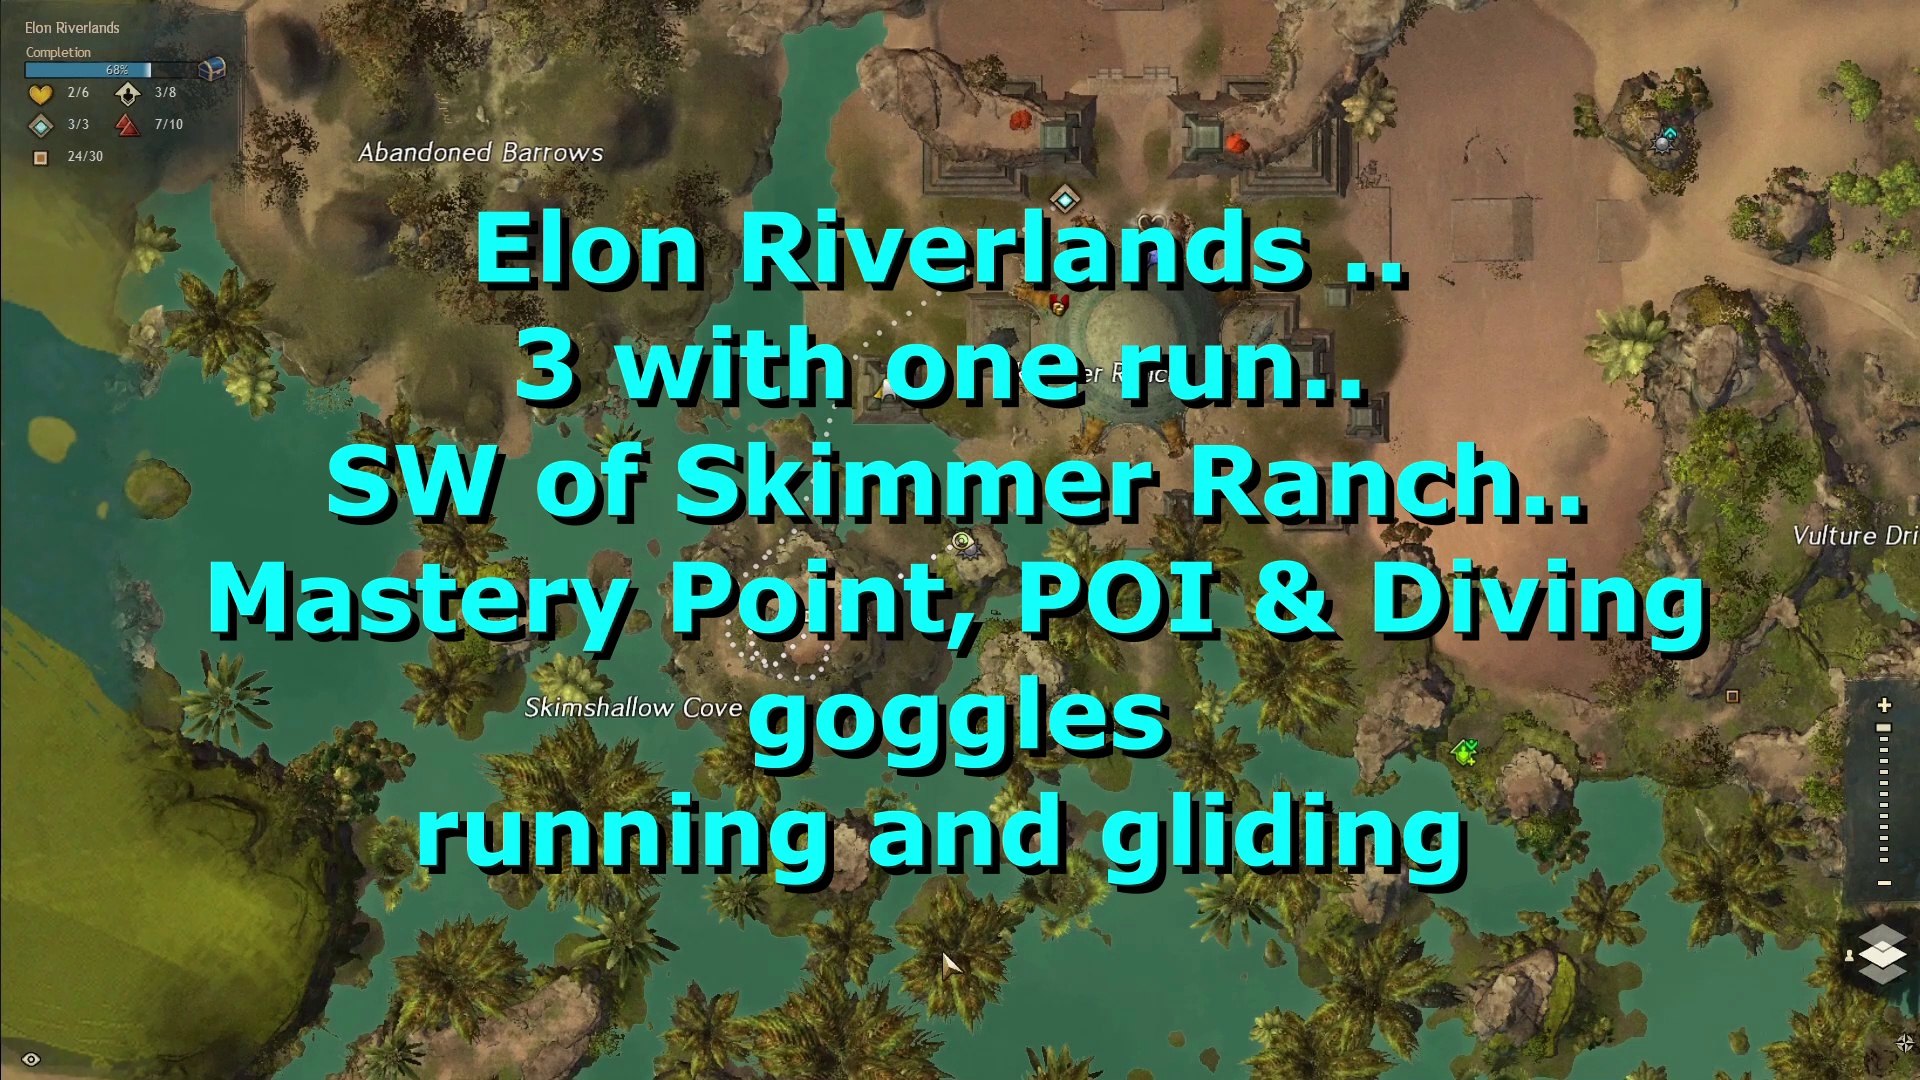 Guild Wars 2 Elon Riverlands Skimmer Ranch Mastery Poi And Diving